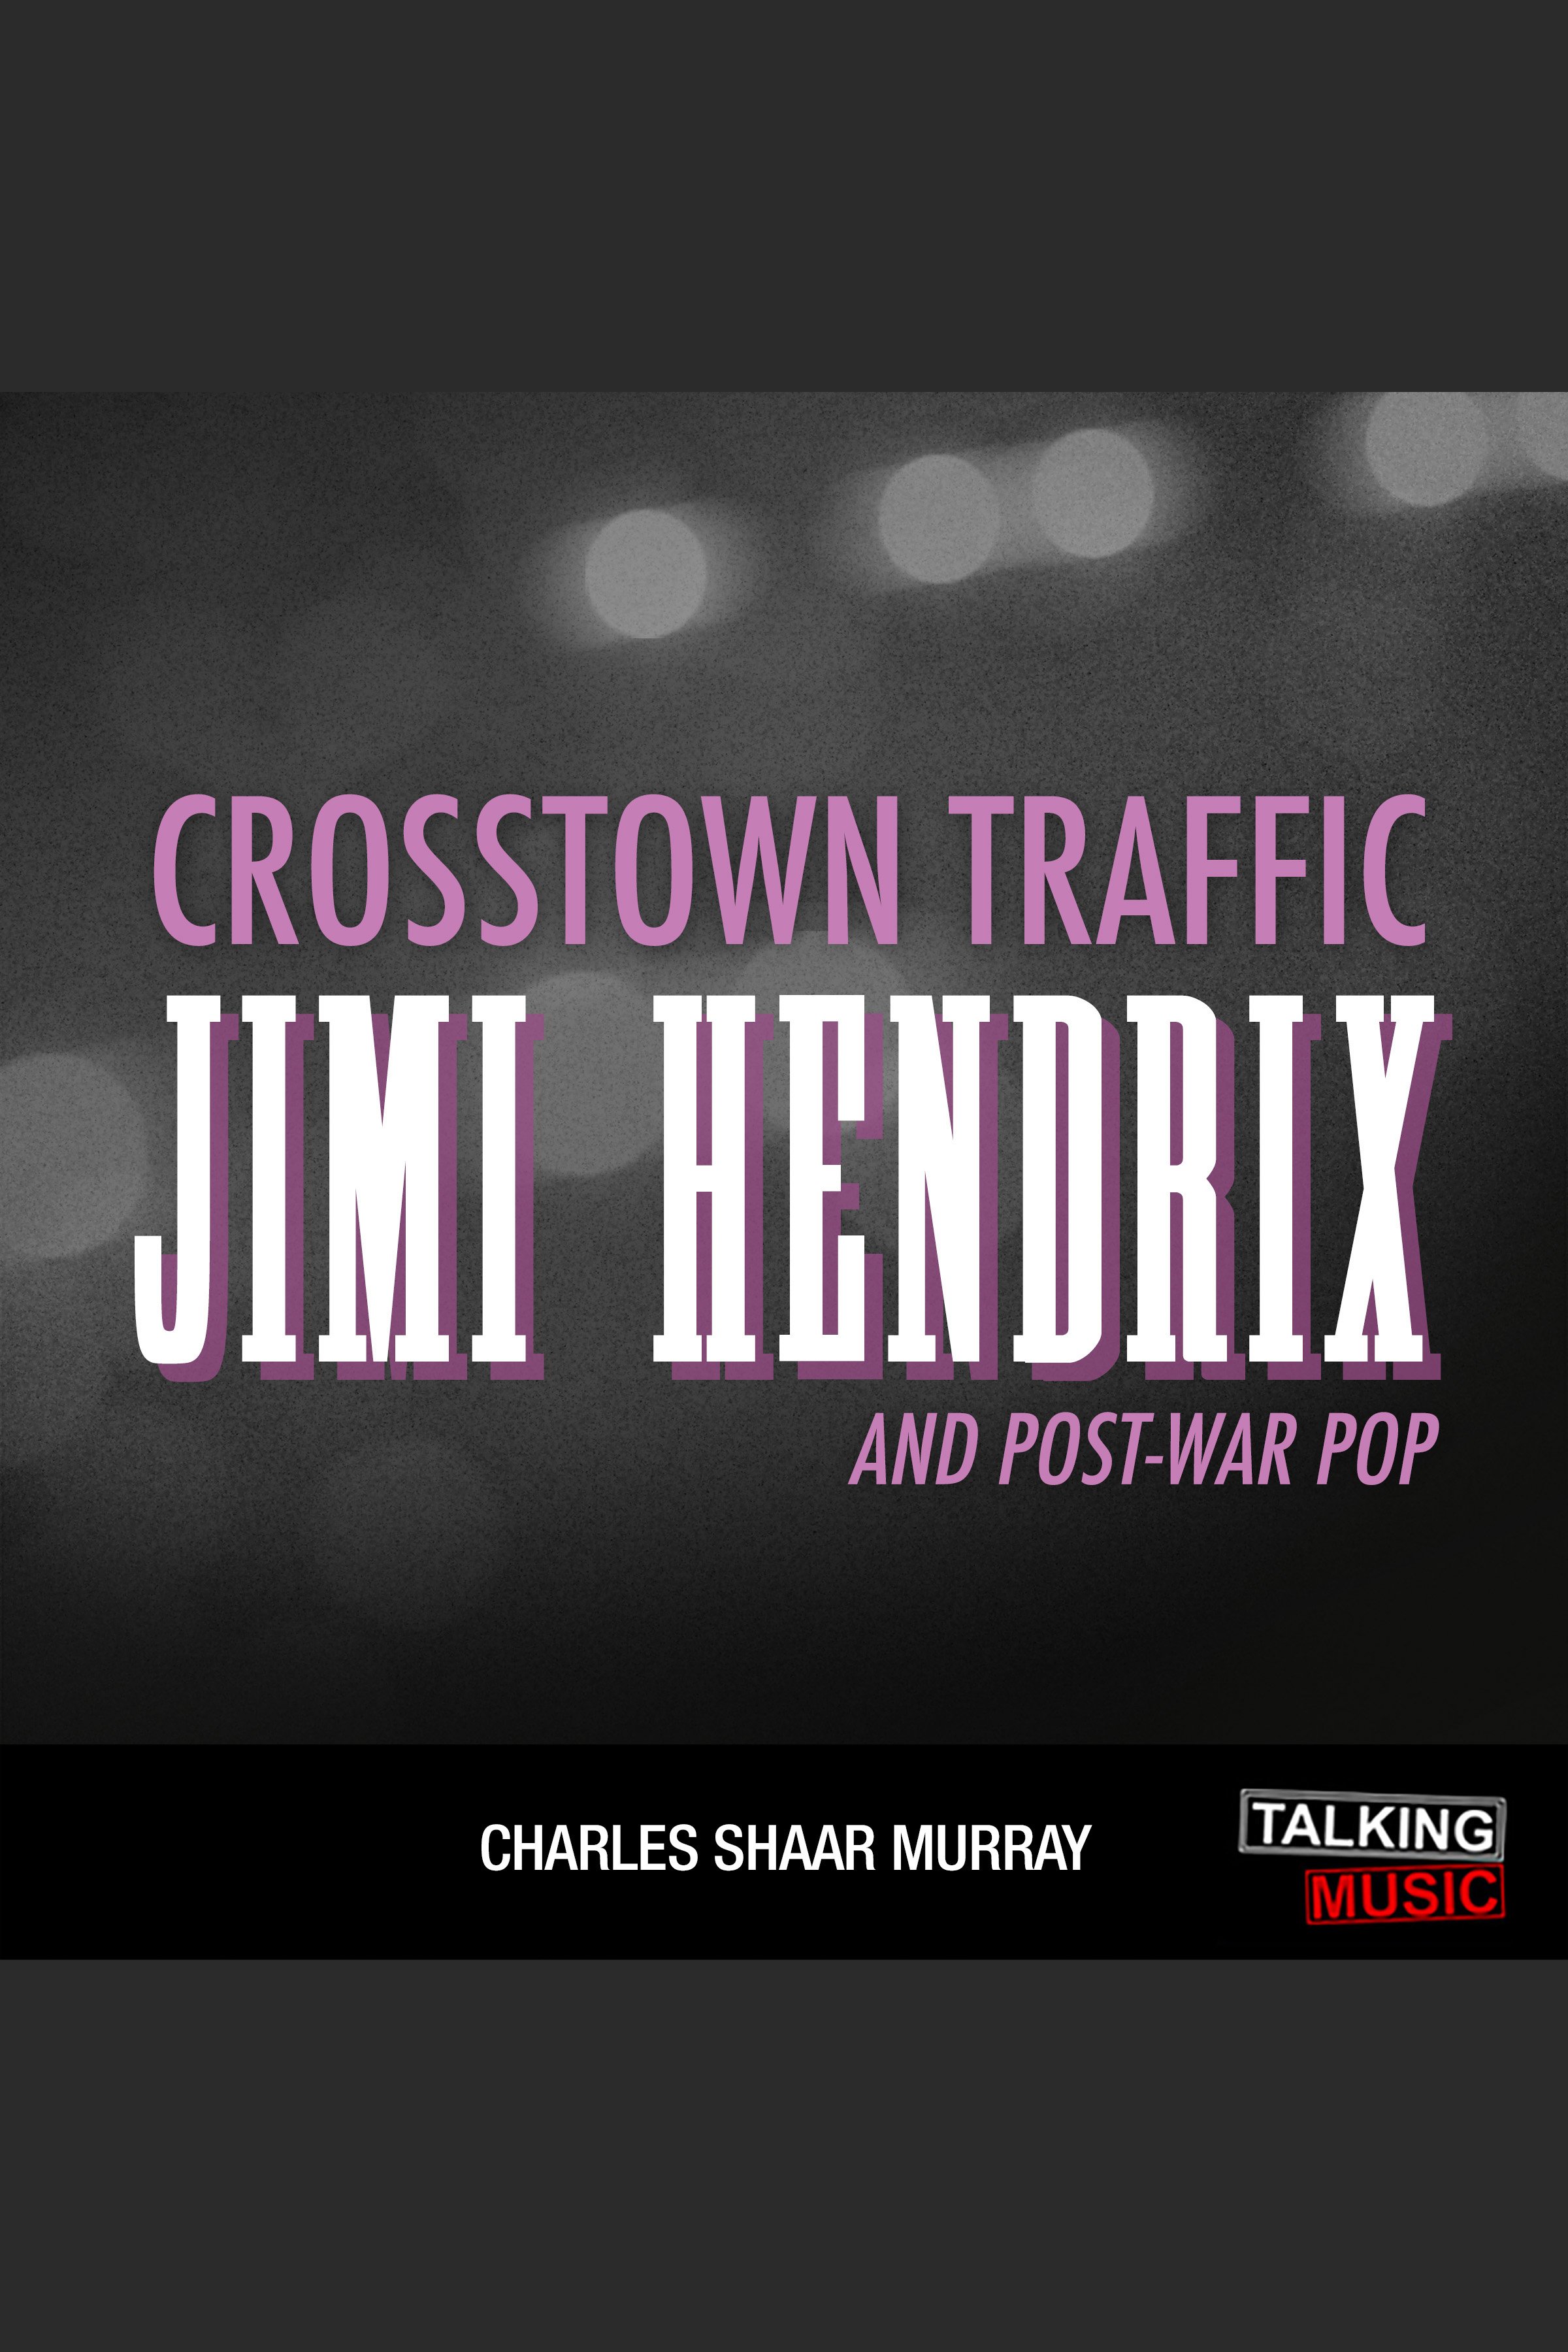 Crosstown Traffic Jimi Hendrix and Post-War Pop cover image